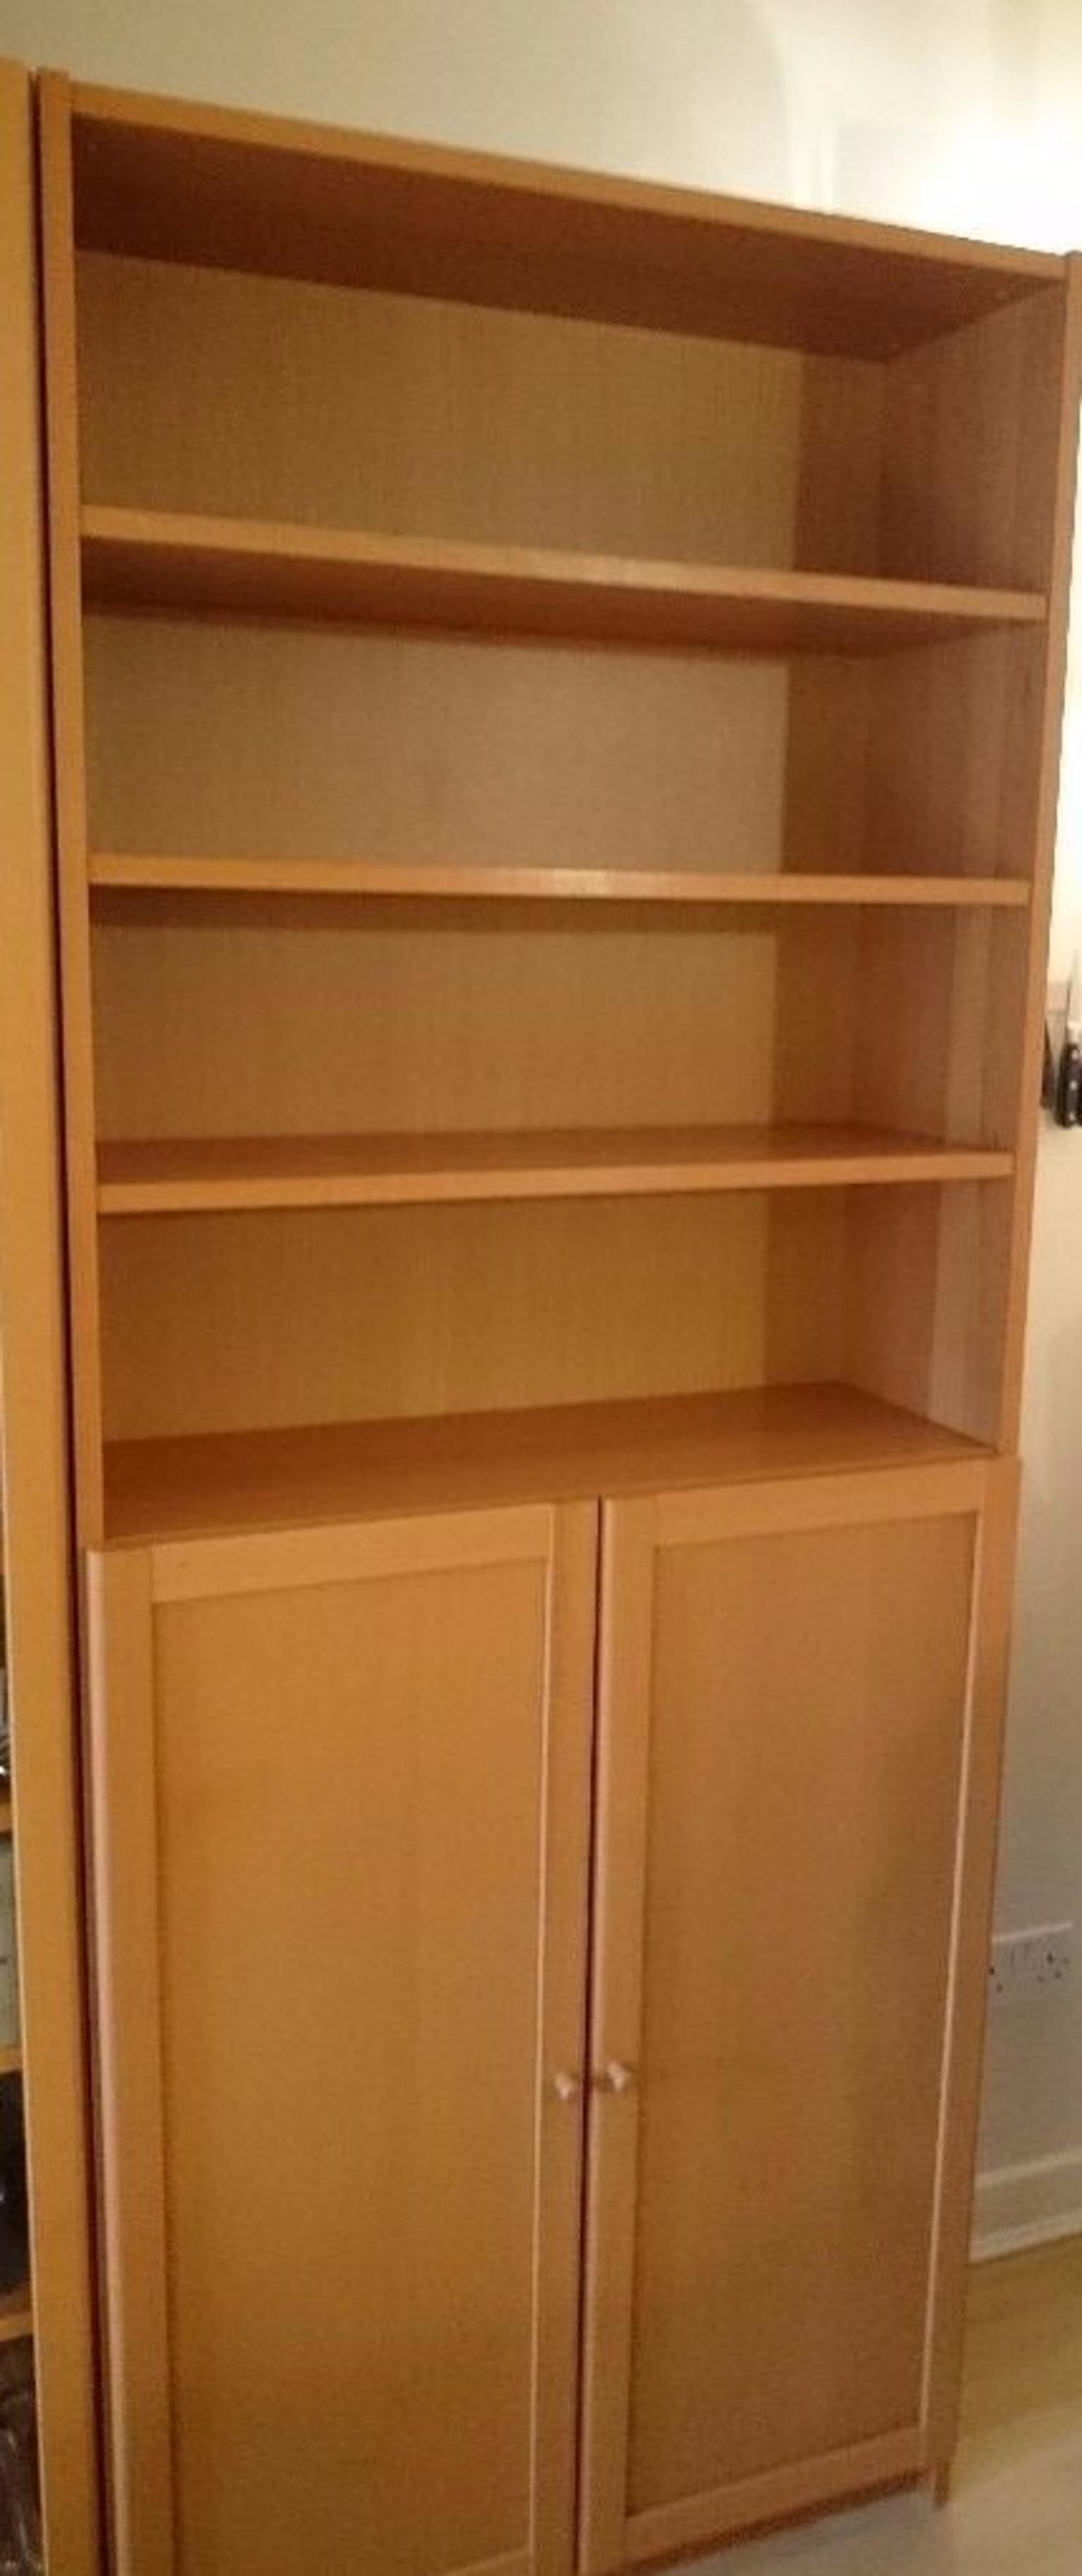 Ikea Billy Bookcase With Doors In Sw10 Chelsea For 15 00 For Sale